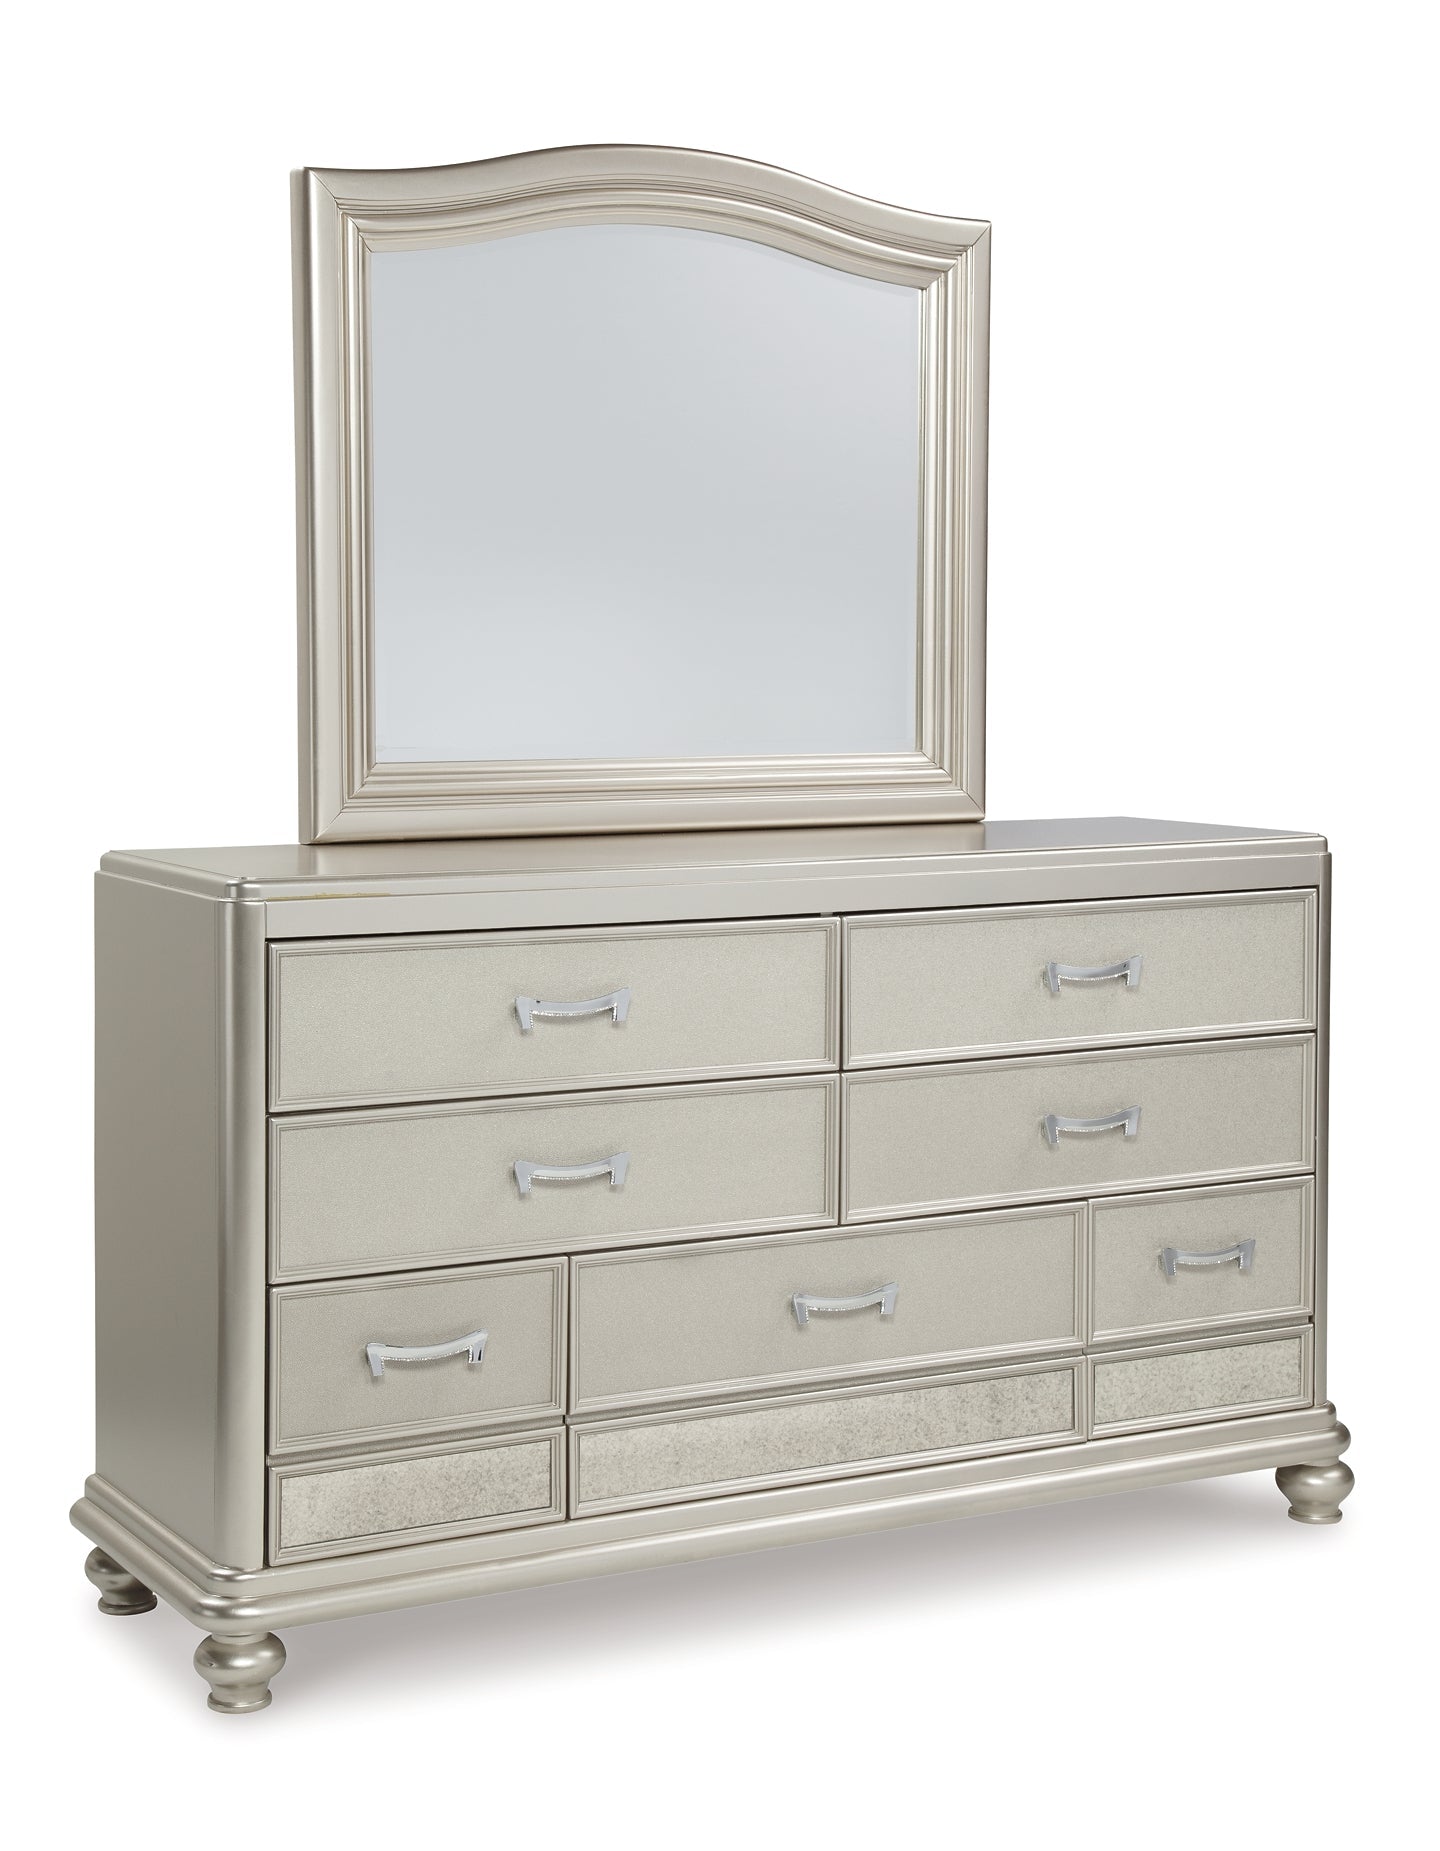 Coralayne King Upholstered Bed with Mirrored Dresser at Walker Mattress and Furniture Locations in Cedar Park and Belton TX.